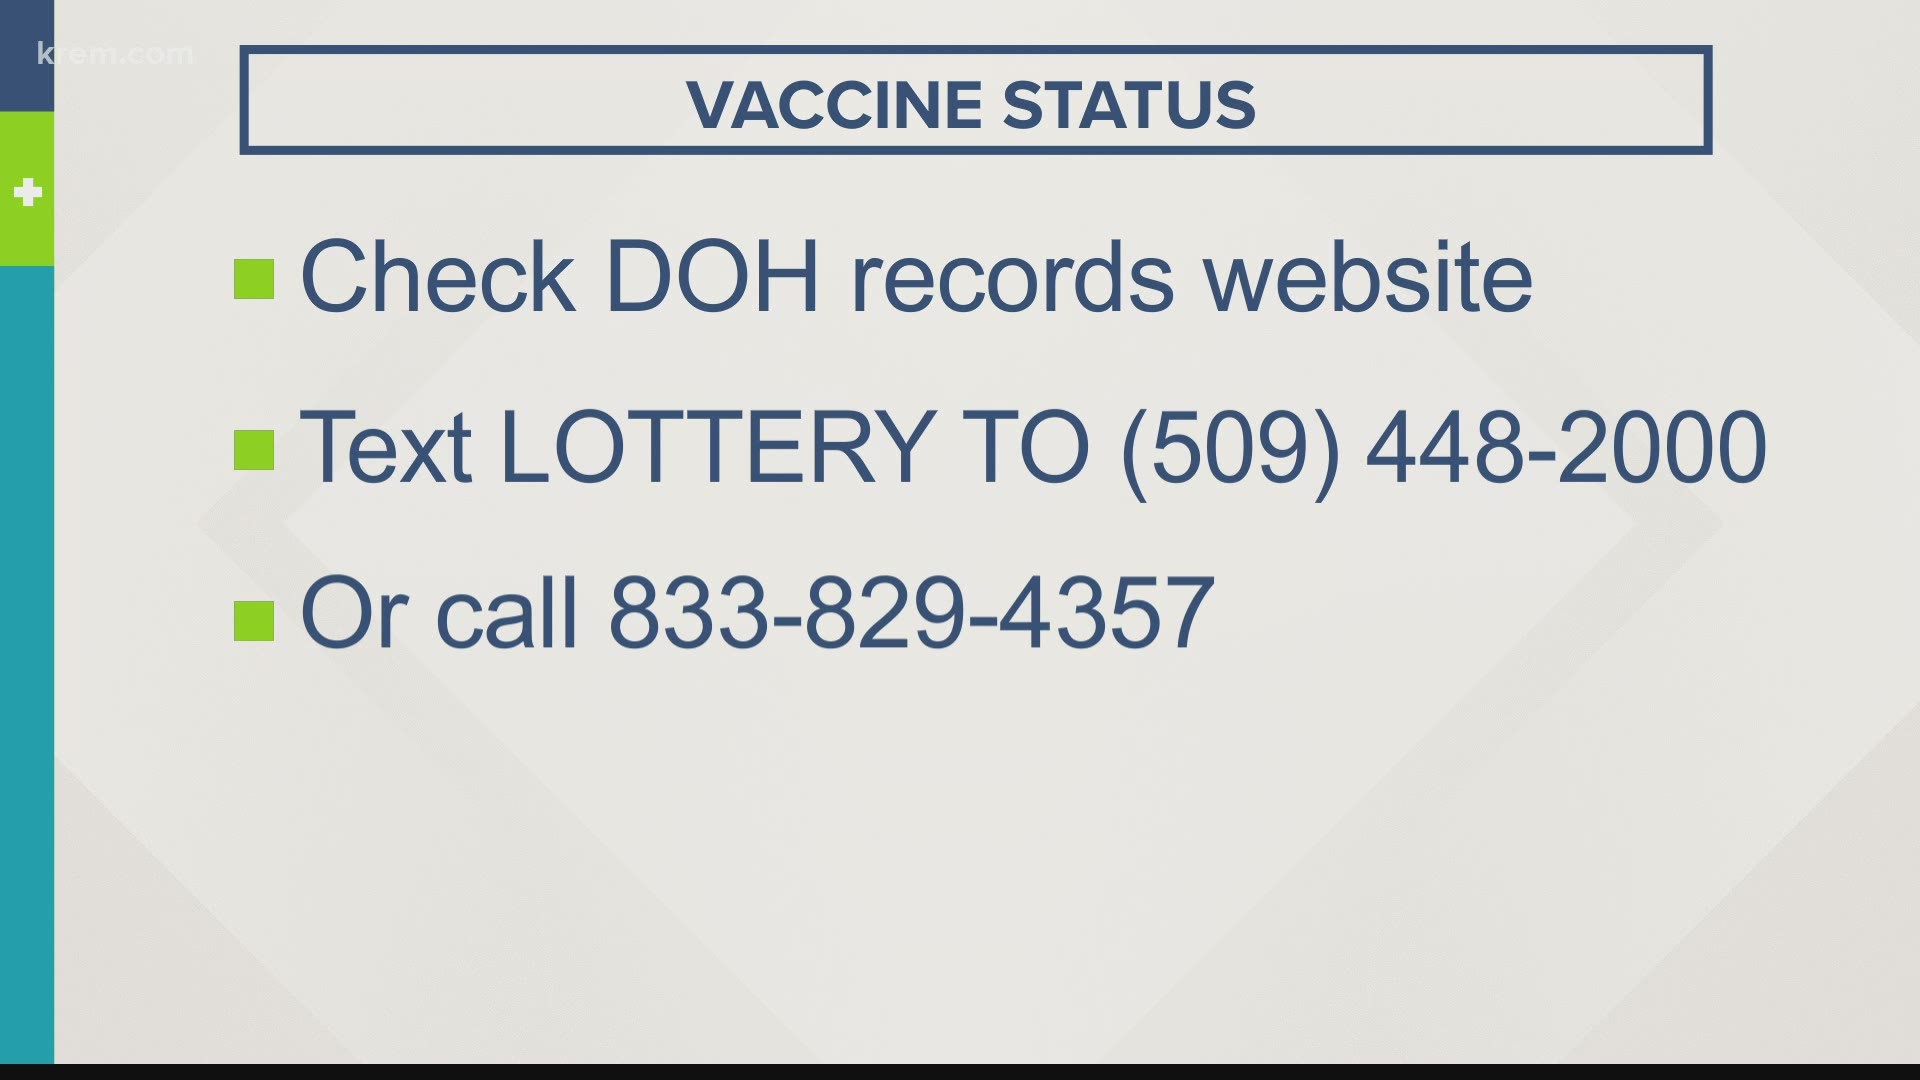 The Washington State Department of Health says they're aware of the differences between vaccination data displayed in the state’s data dashboard compared to the CDC.